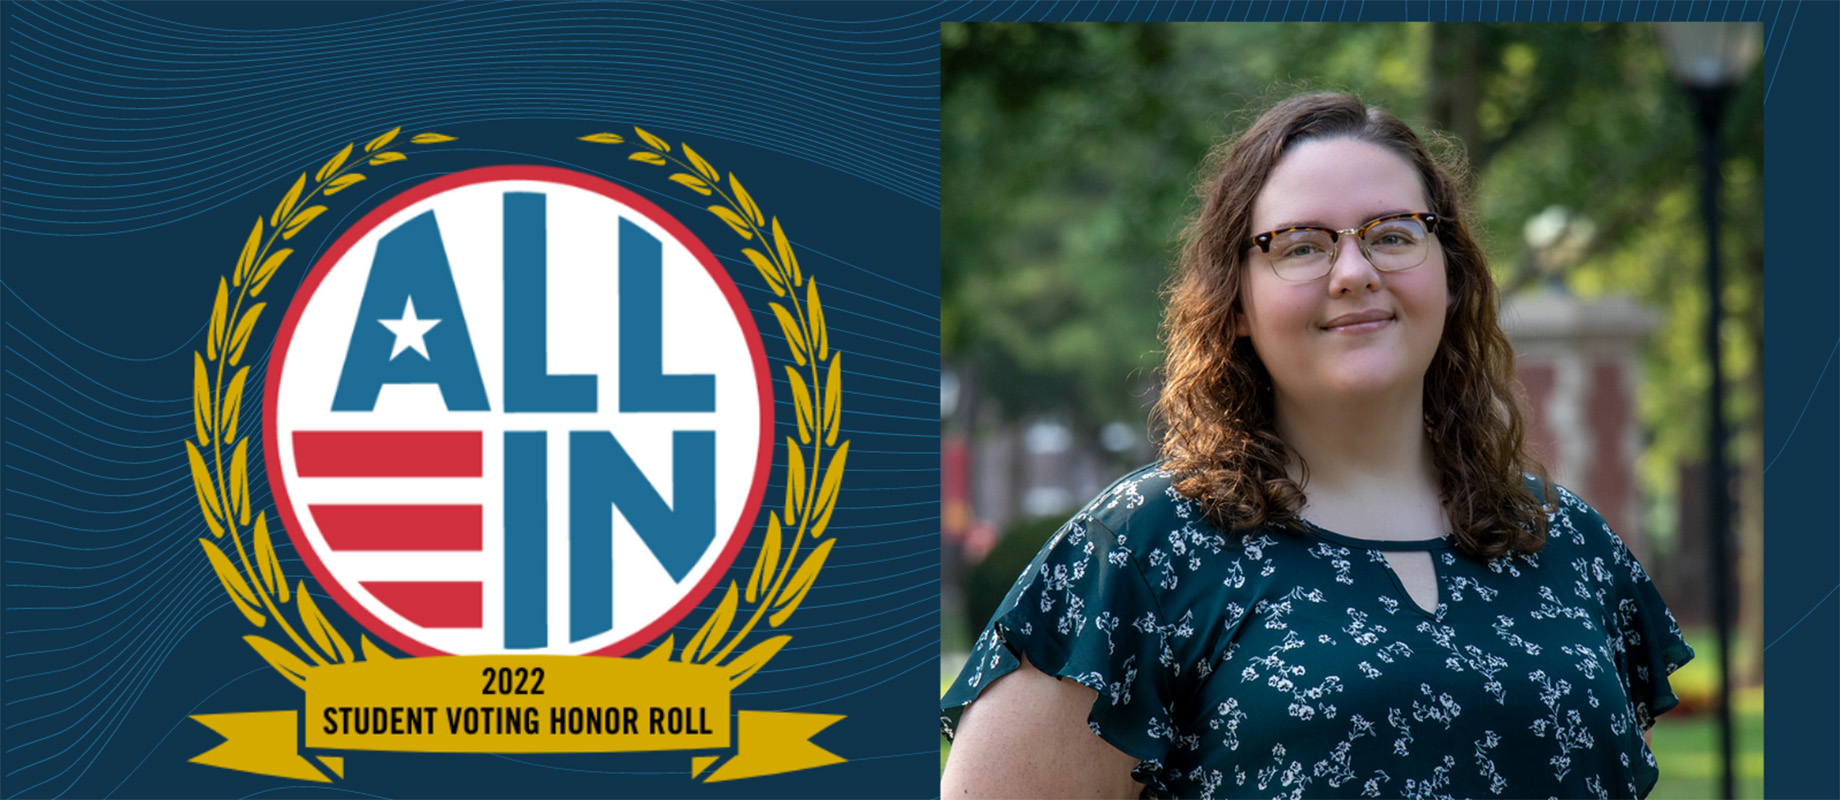  Simpson College Student Recognized on the 2022 ALL IN Student Voting Honor Roll